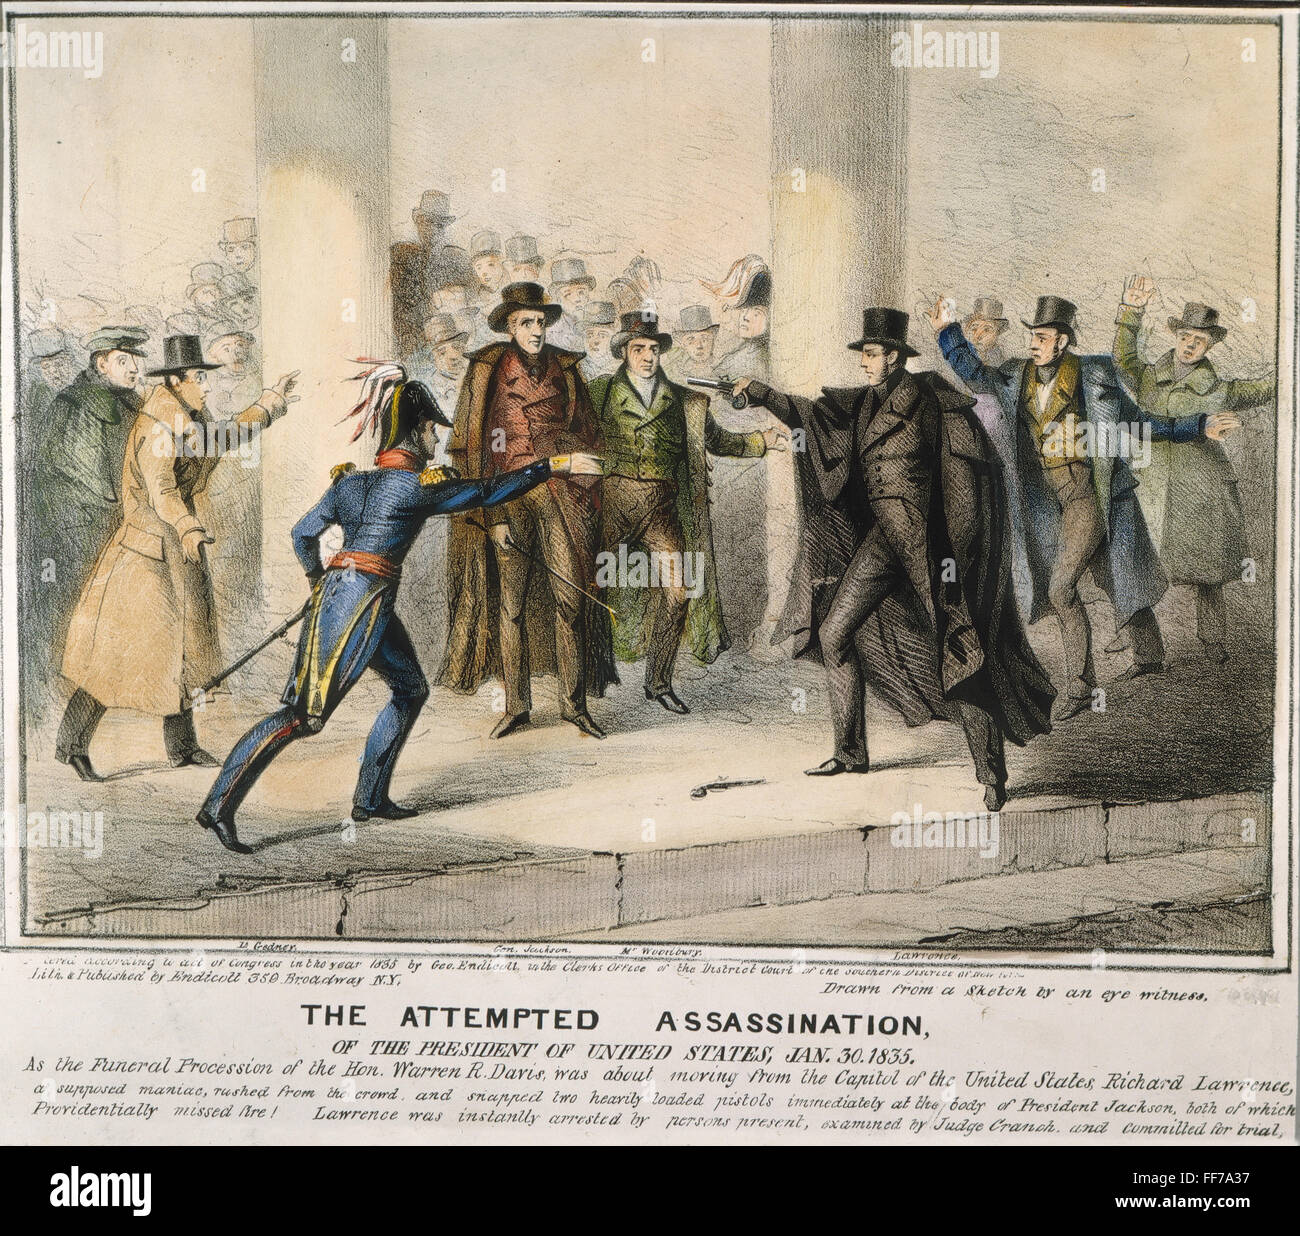 ANDREW JACKSON (1767-1845). /nSeventh President of the United States. The attempted assassination of President Andrew Jackson by Richard Lawrence on the steps of the Capitol building at Washington D.C., 30 January 1835. Contemporary lithograph. Stock Photo